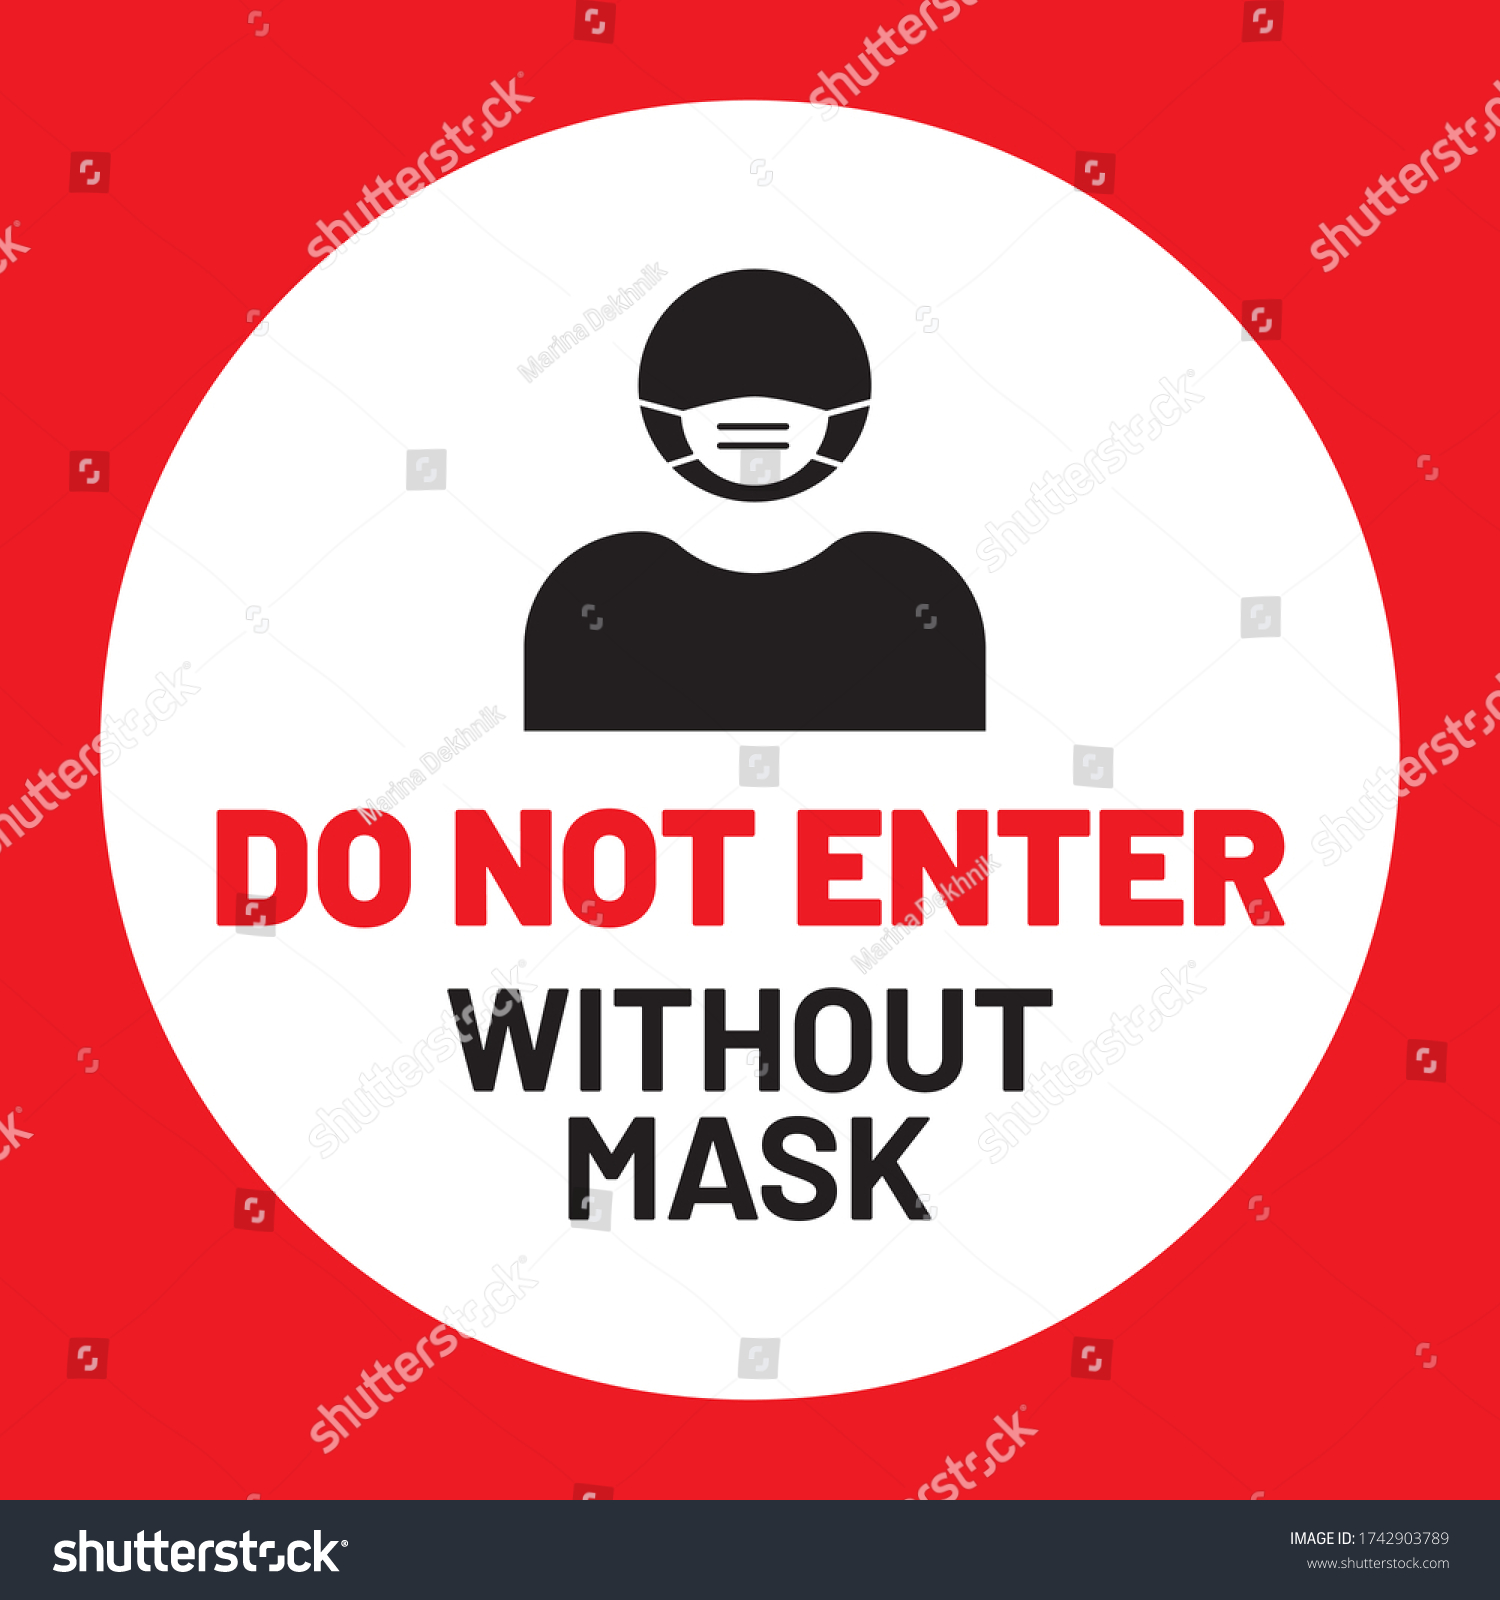 Do Not Enter Without Mask Information Stock Vector Royalty Free